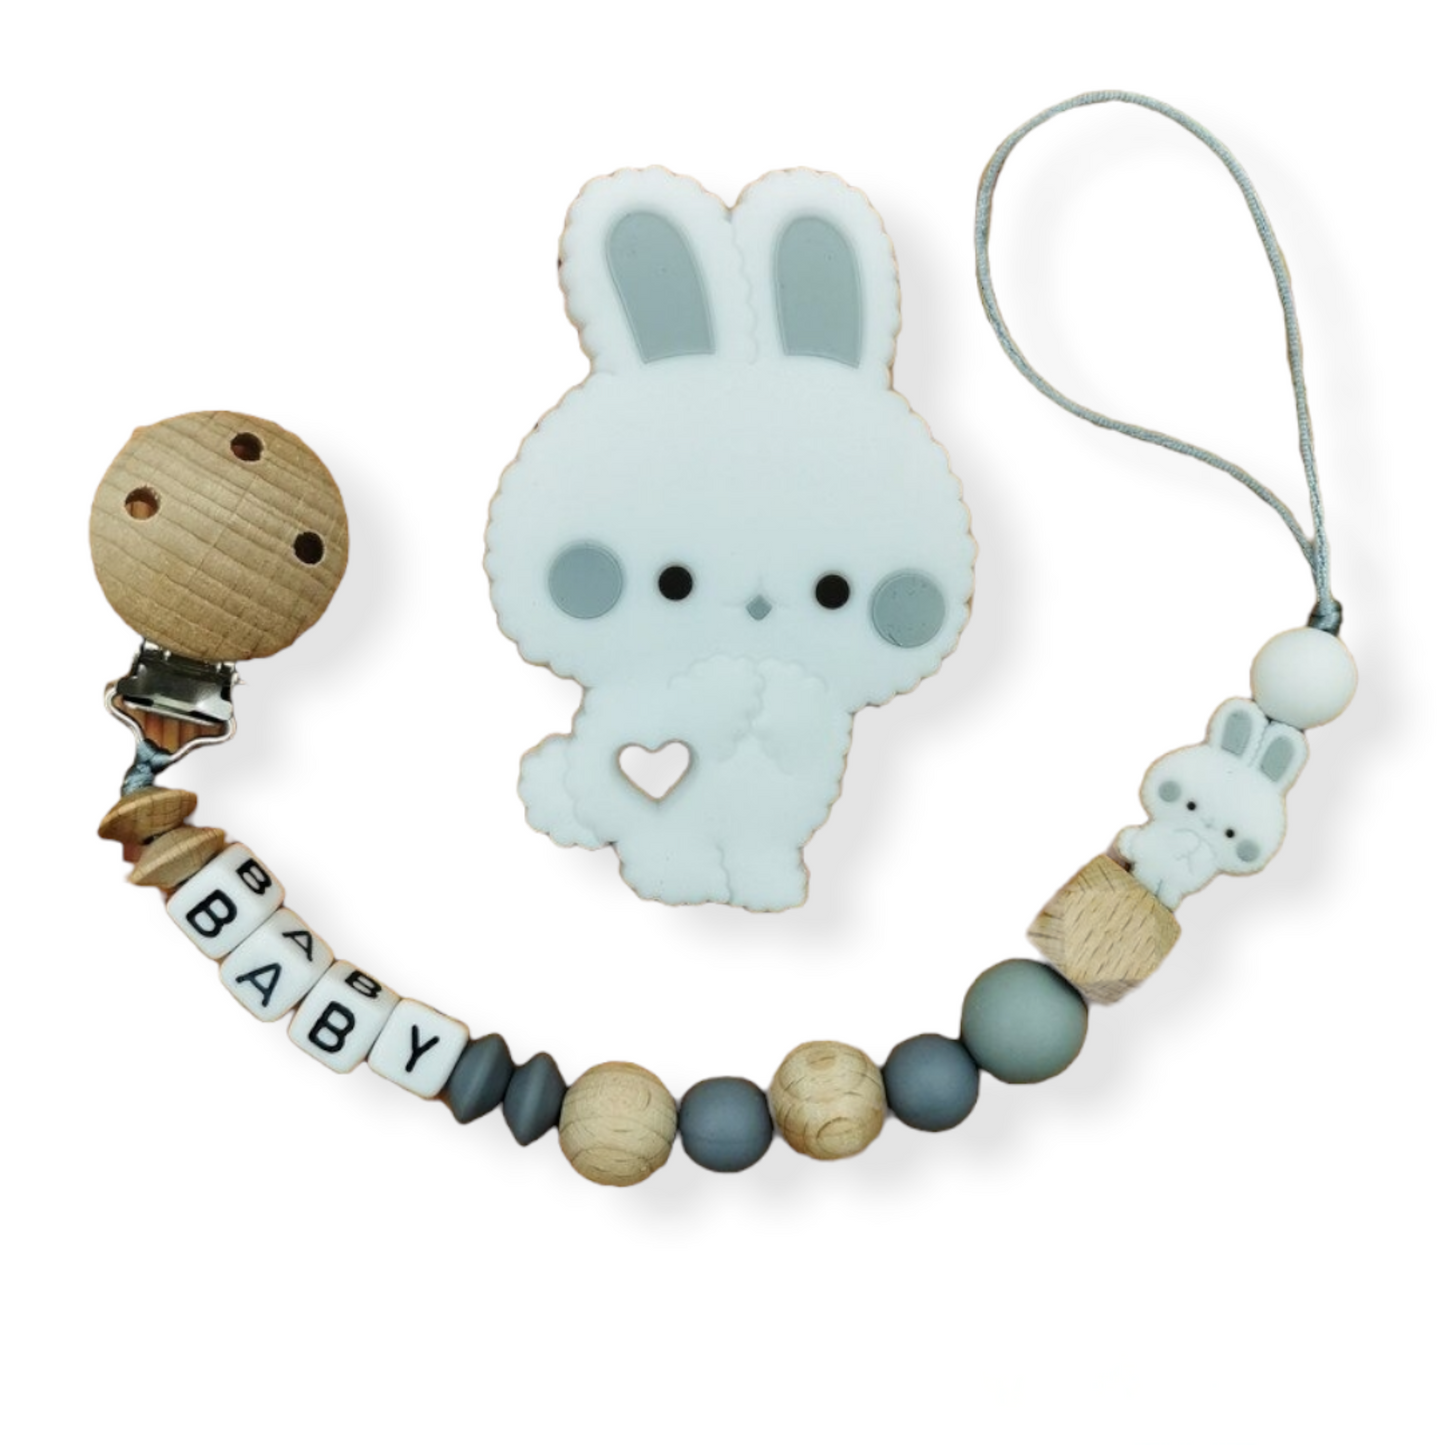 grey wooden bunny customizable pacifier holder with baby's name and silicone bunny teether set for babies